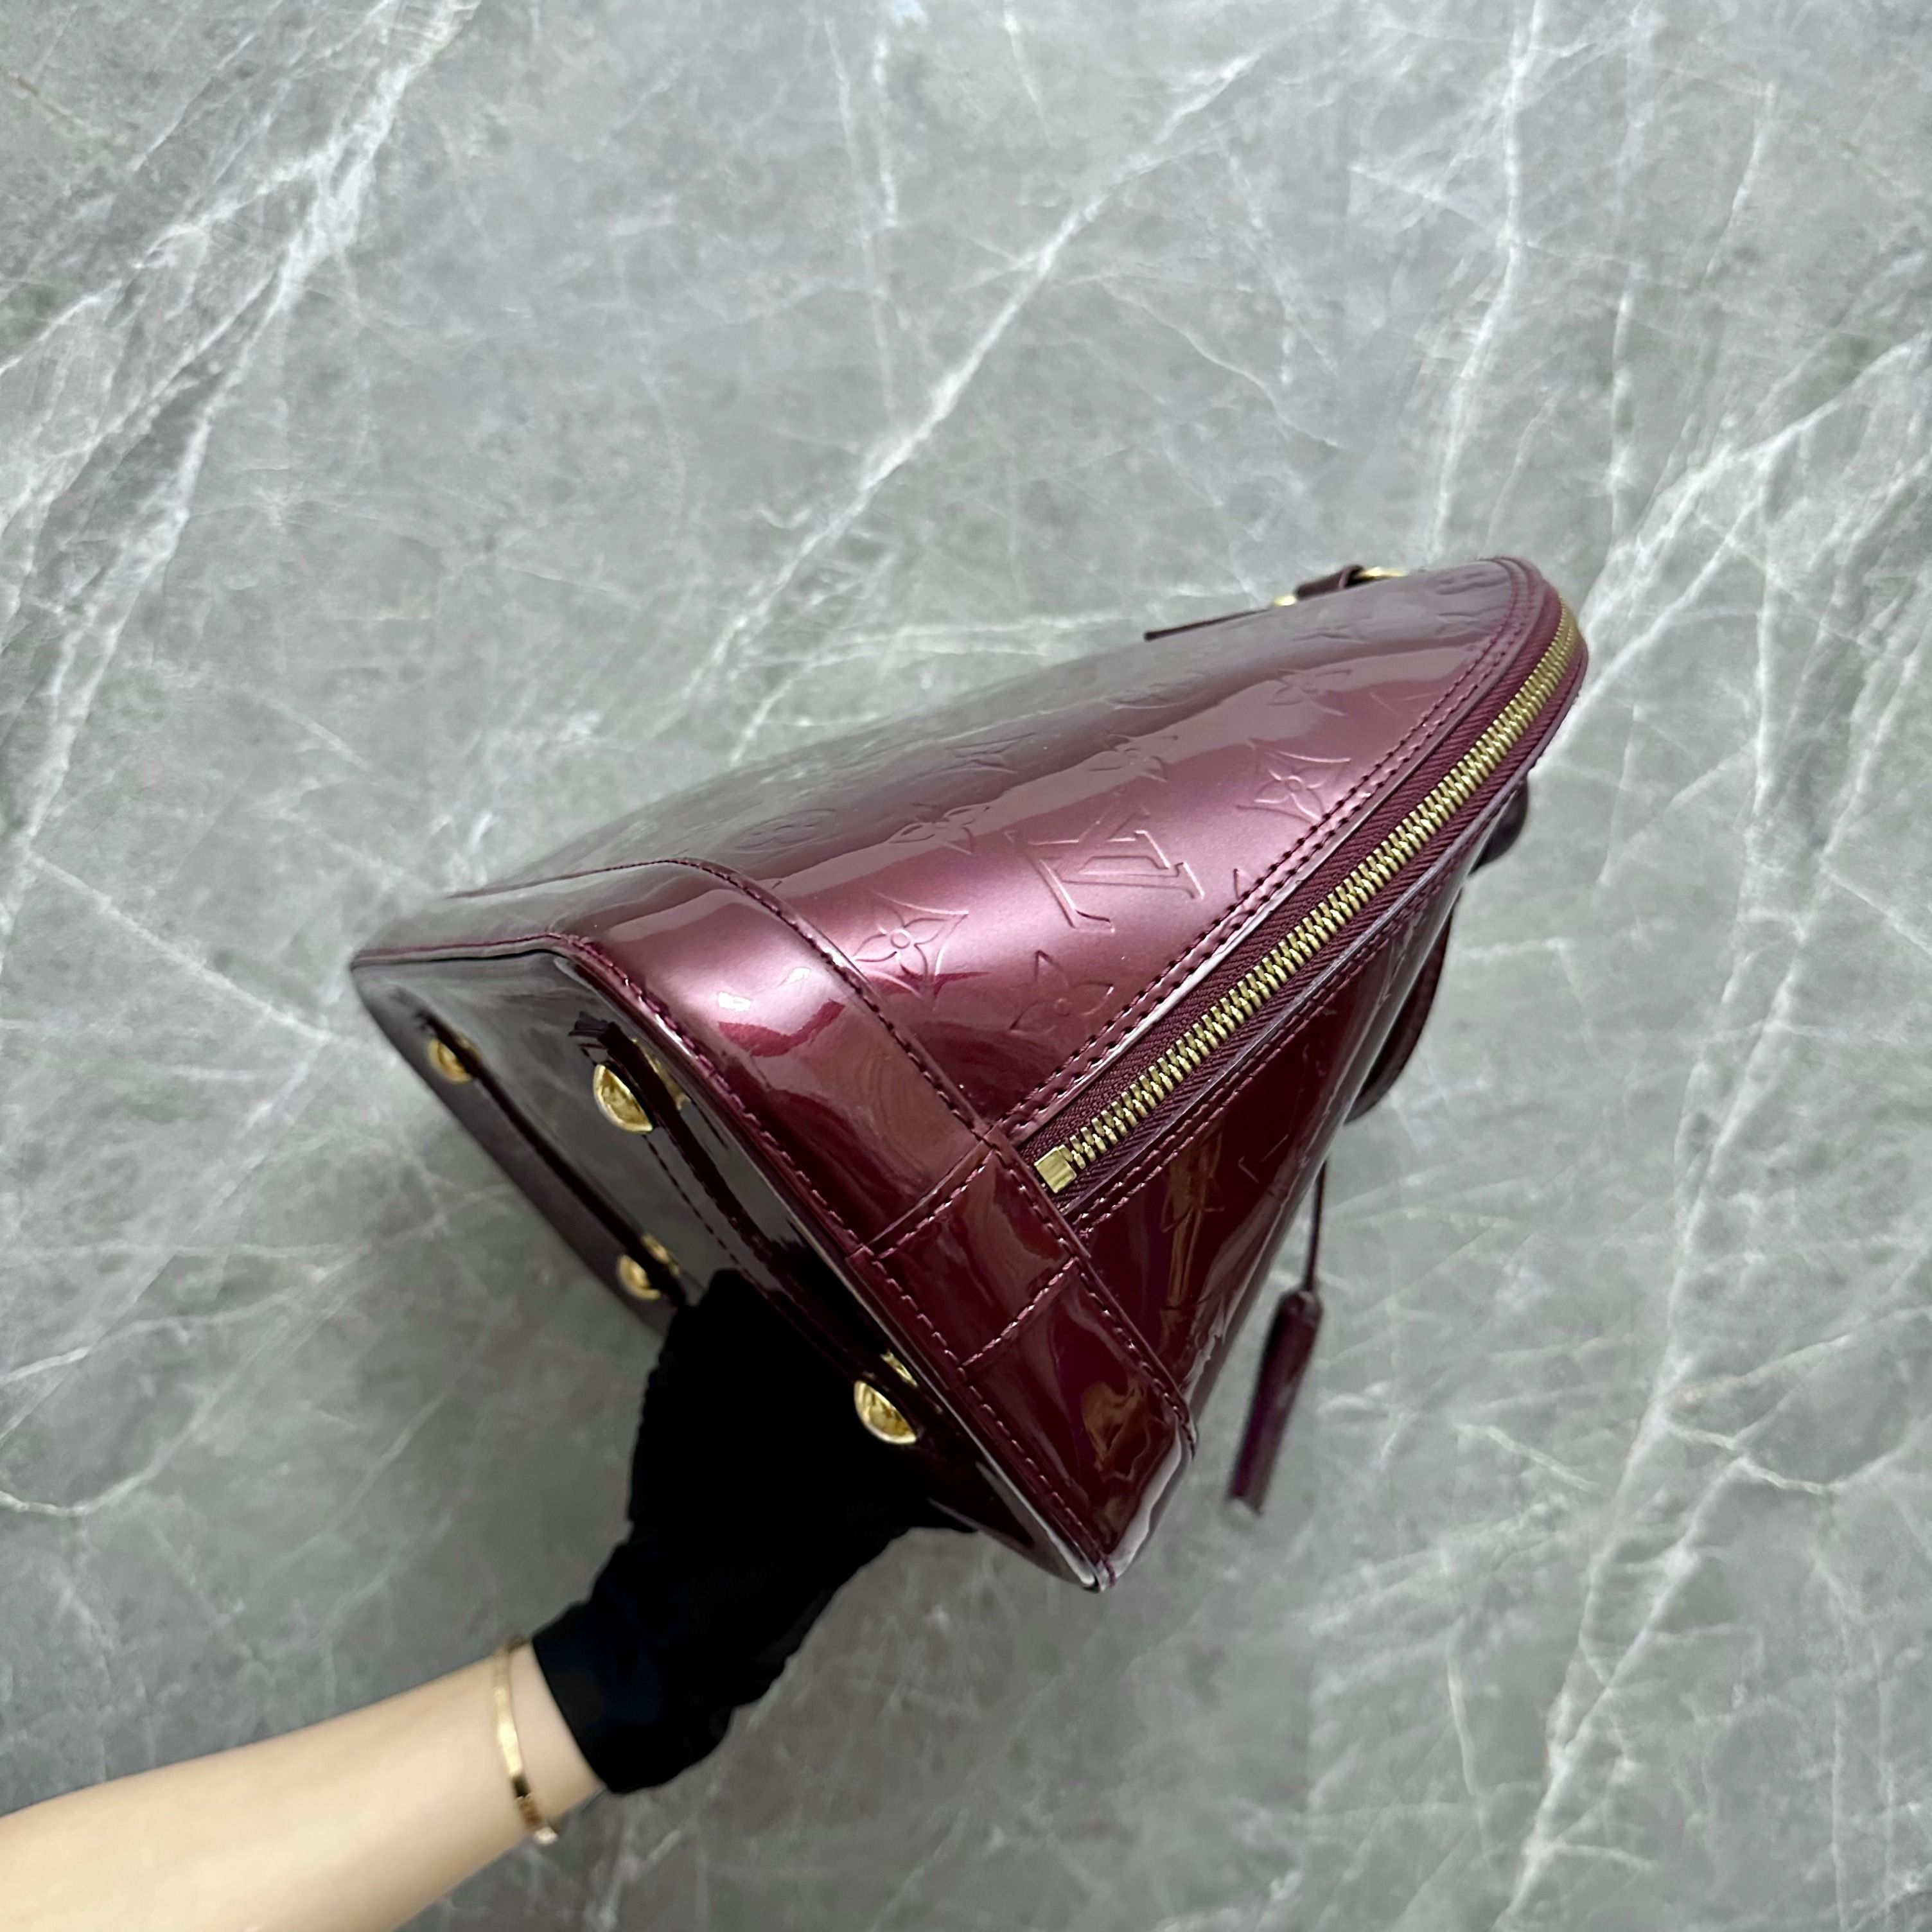 Alma patent leather handbag Louis Vuitton Burgundy in Patent leather -  30050050